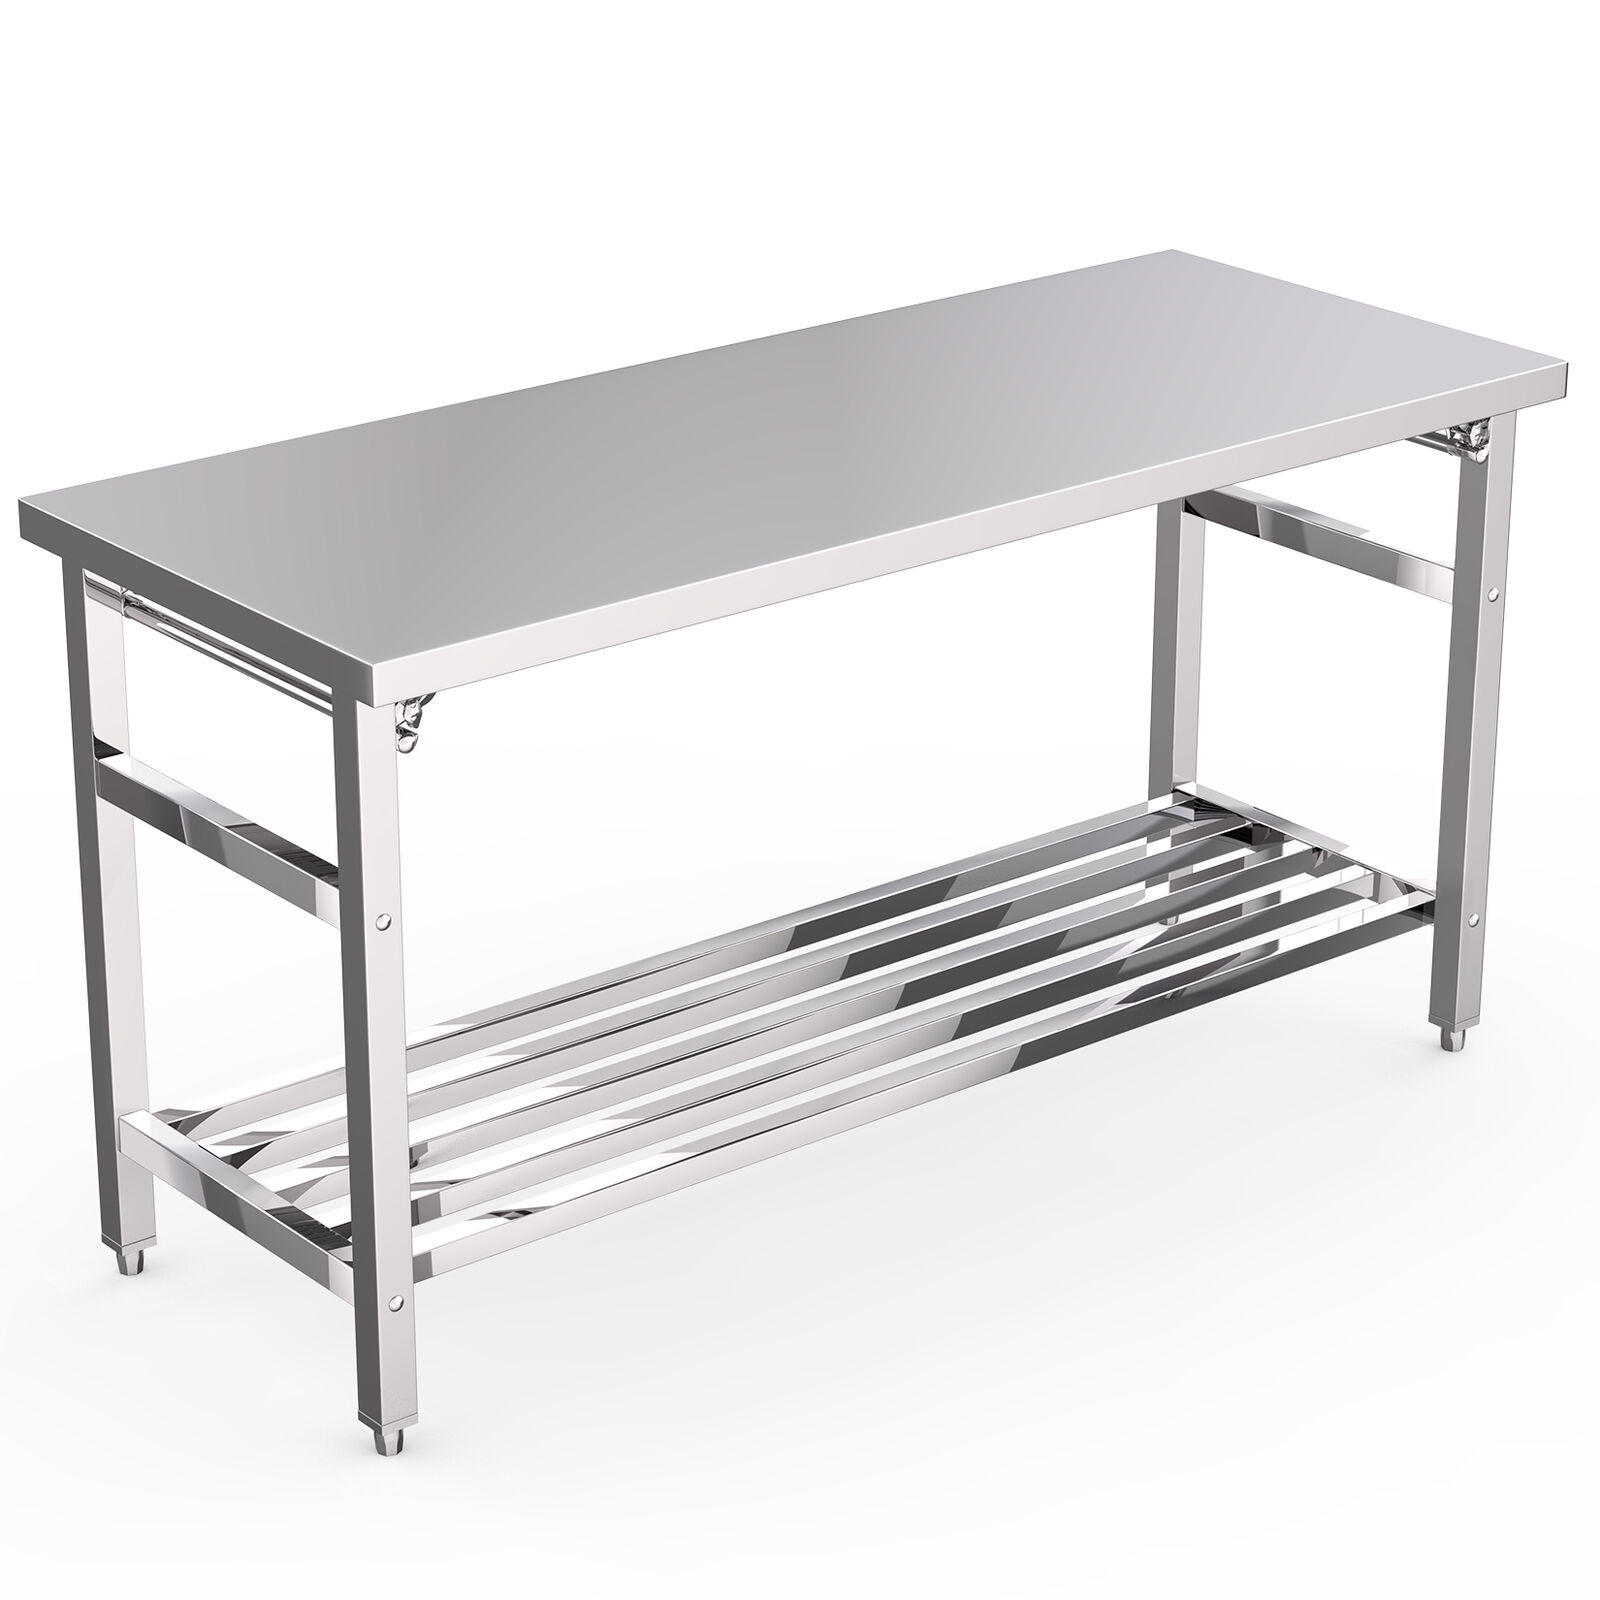 Stainless Steel Cooking Prep Table 60 X 24 Inch Folding Work Table for Kitchen